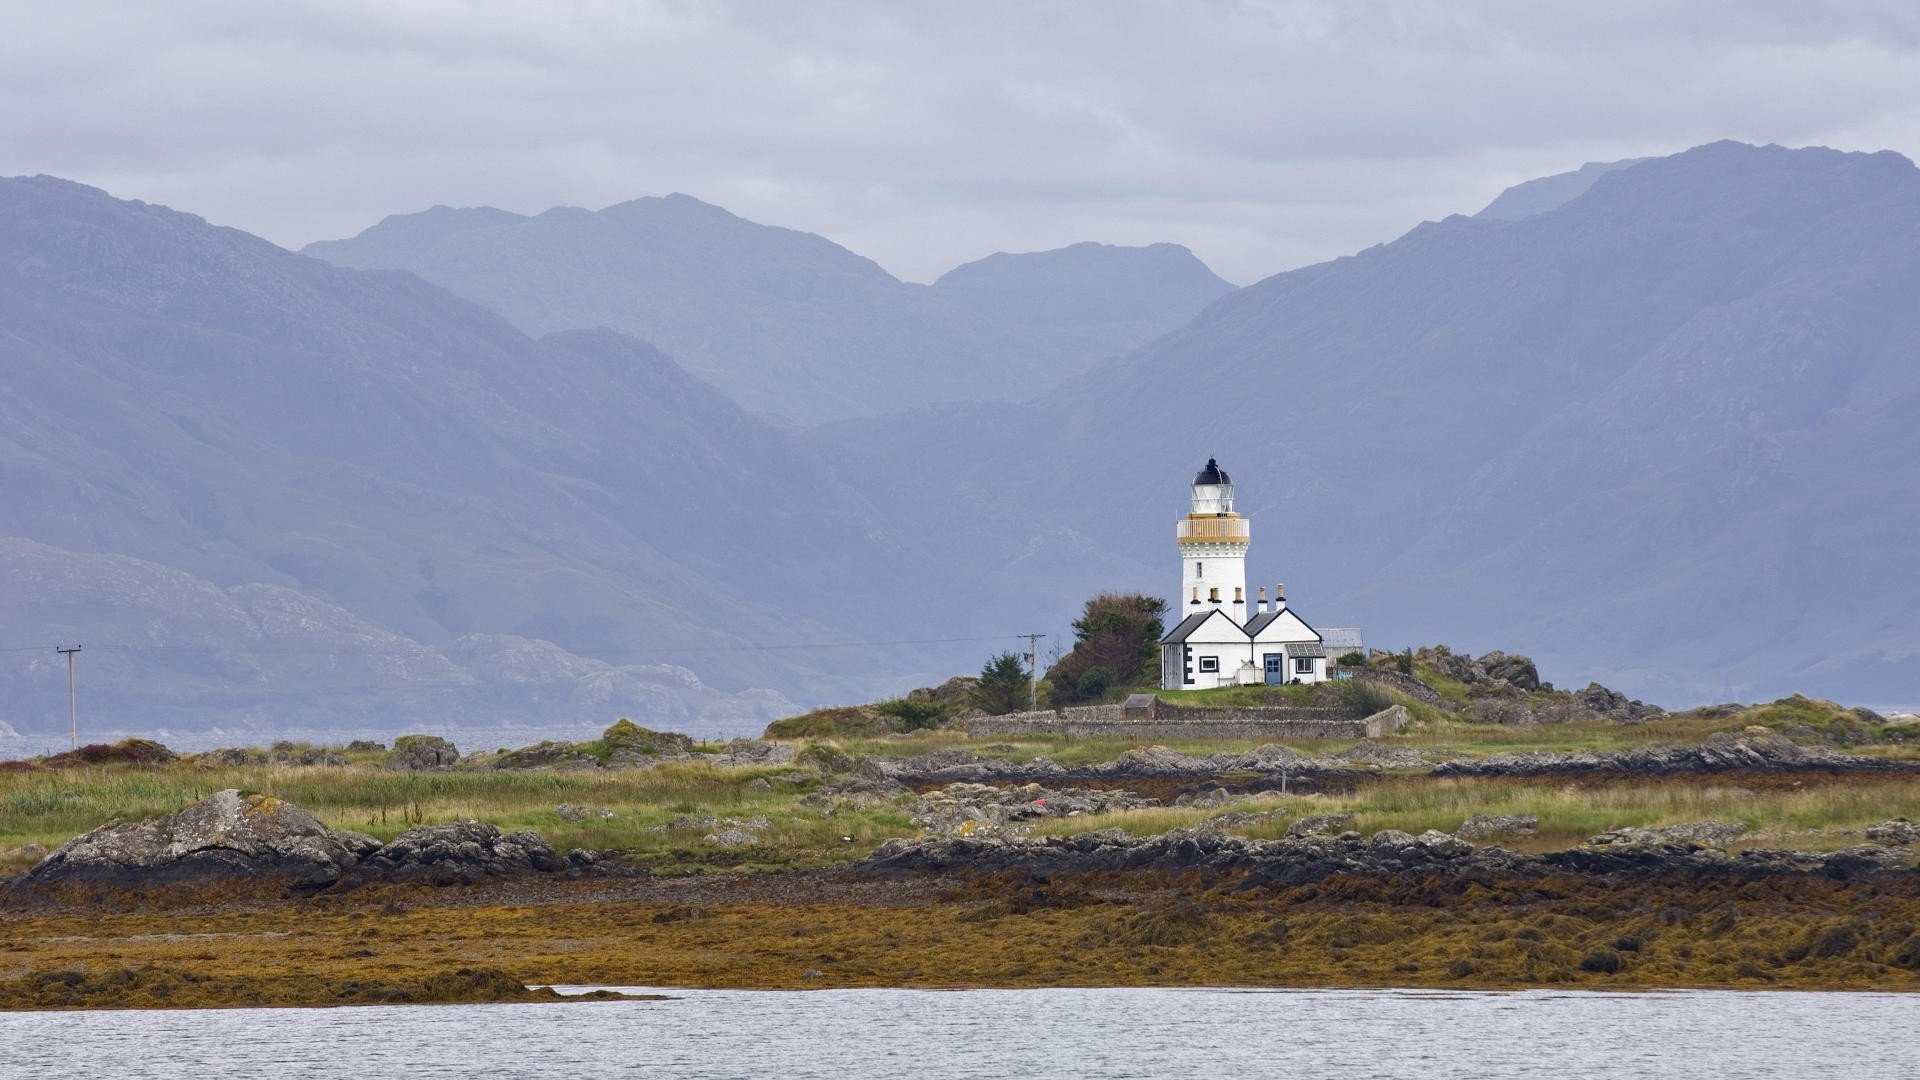 Isle of Skye, Lighthouses in Scotland, HD wallpapers, Desktop and mobile backgrounds, 1920x1080 Full HD Desktop